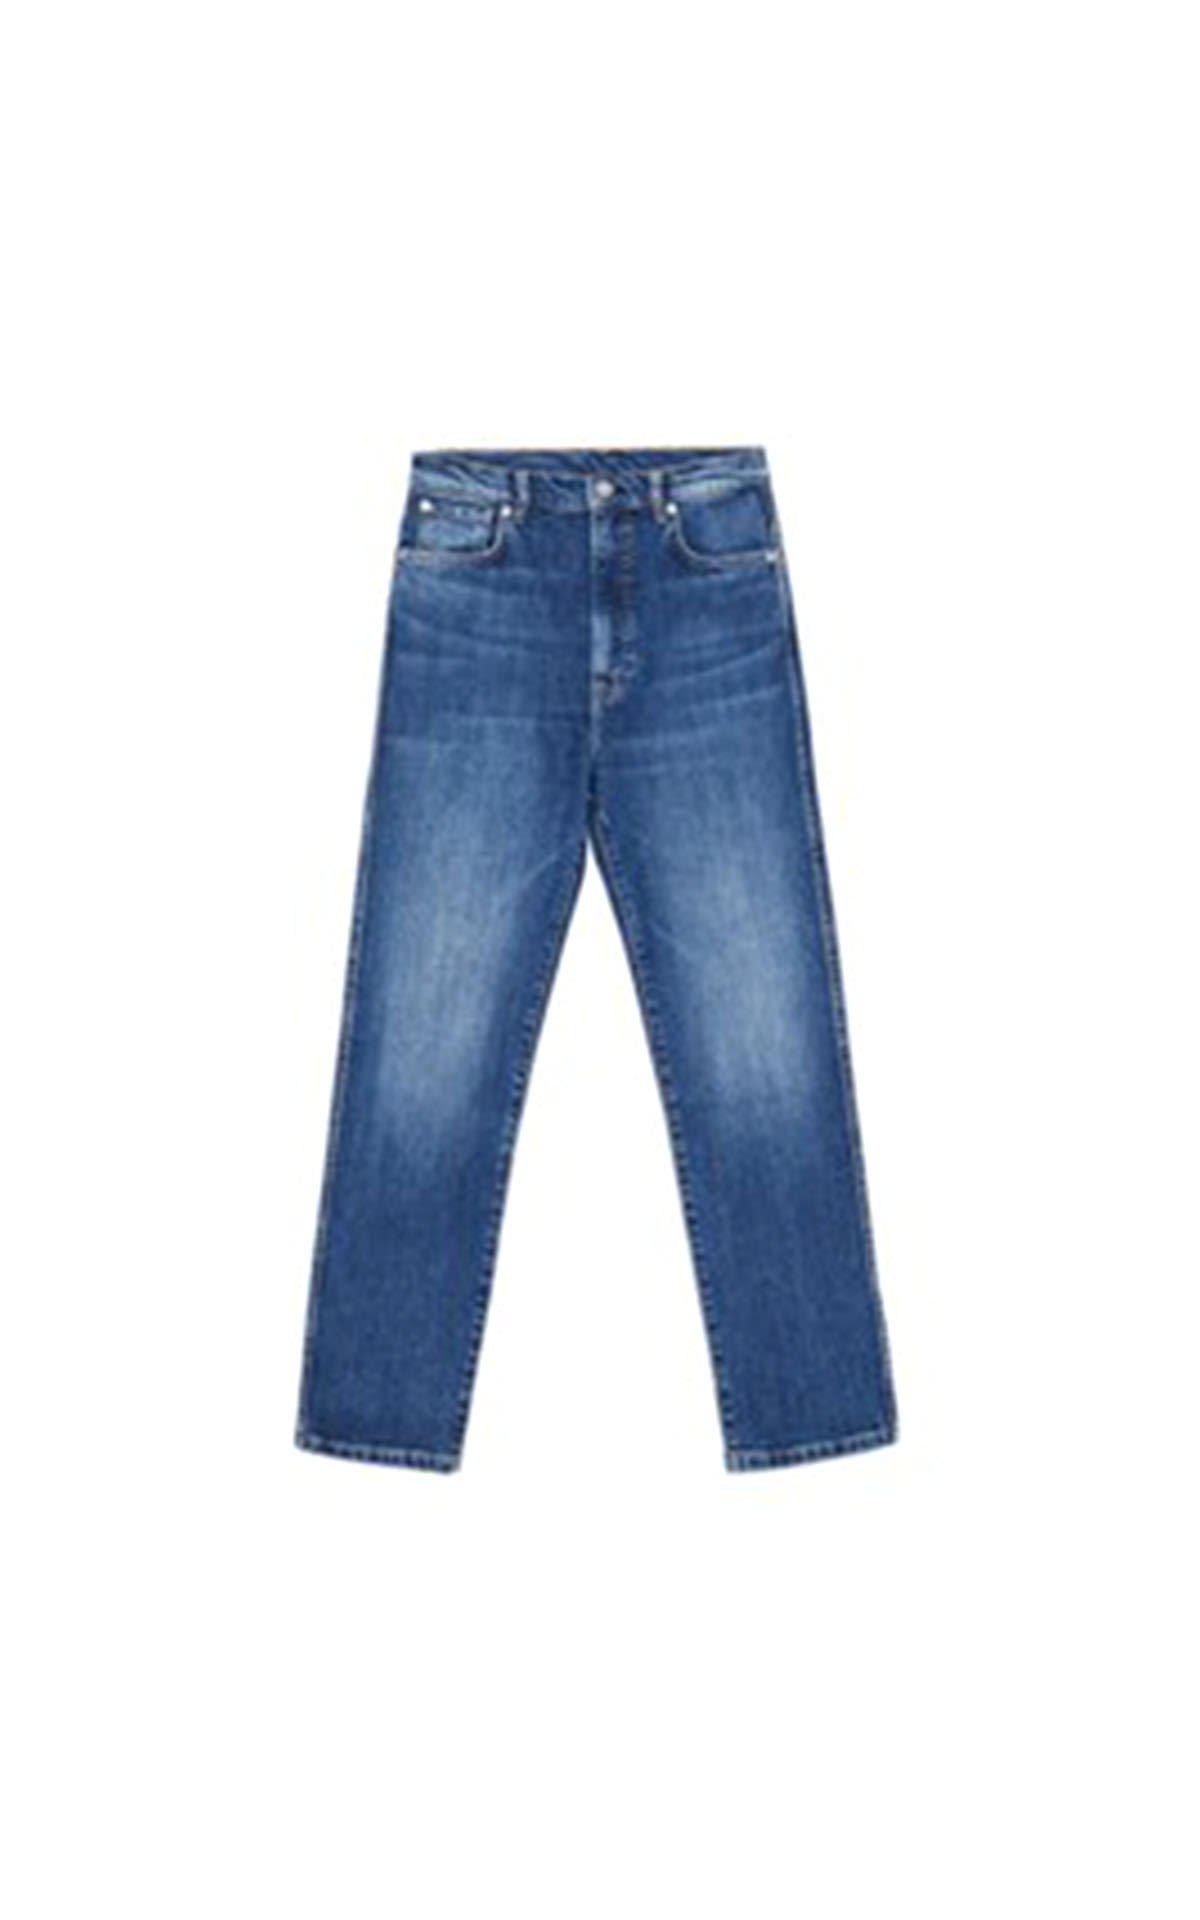 Blue jeans Pepe Jeans